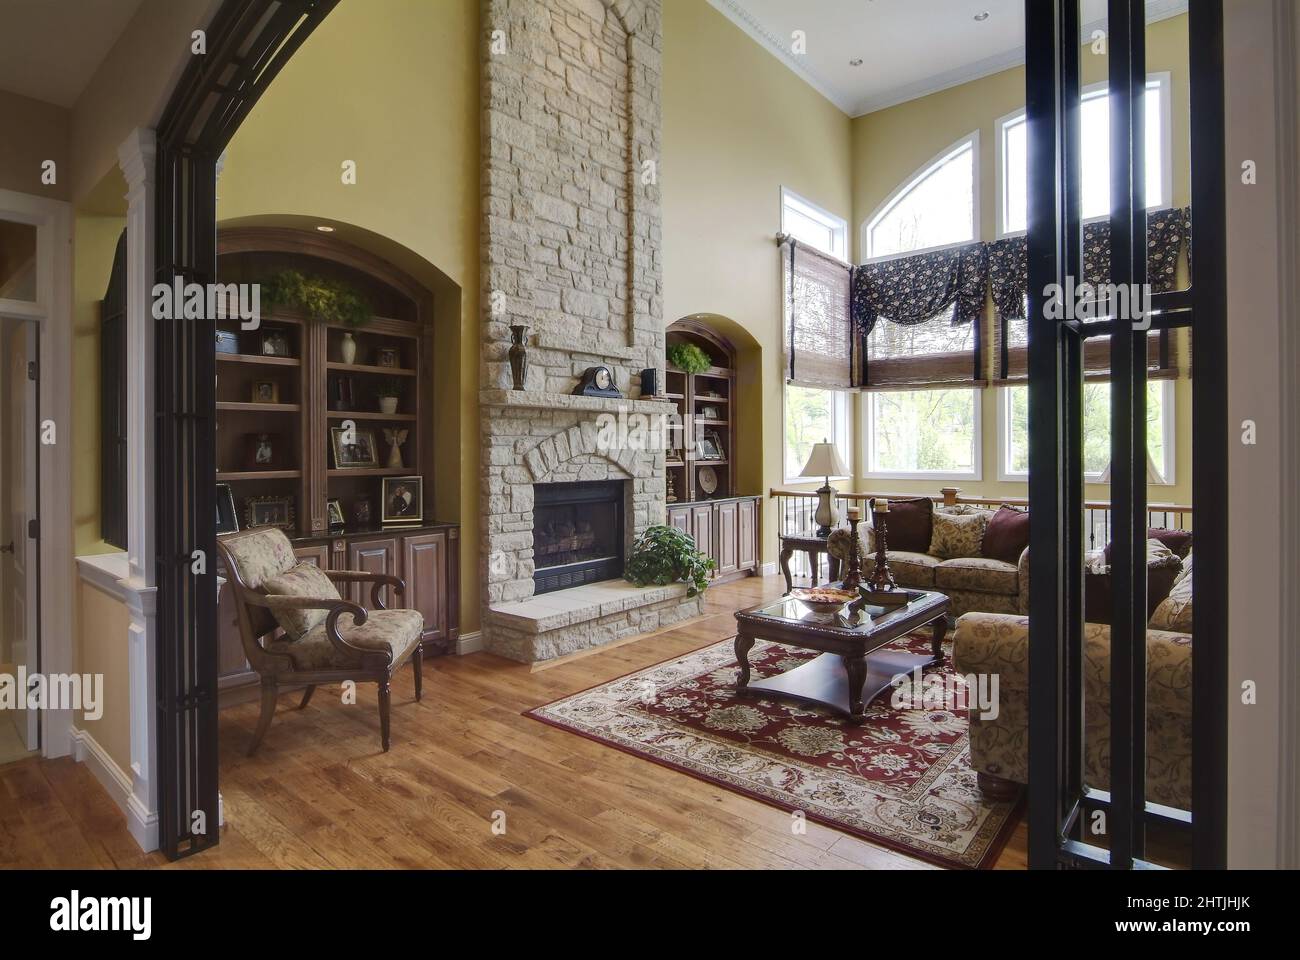 Old-fashioned living room with open wall entrance and stone fireplace Stock Photo